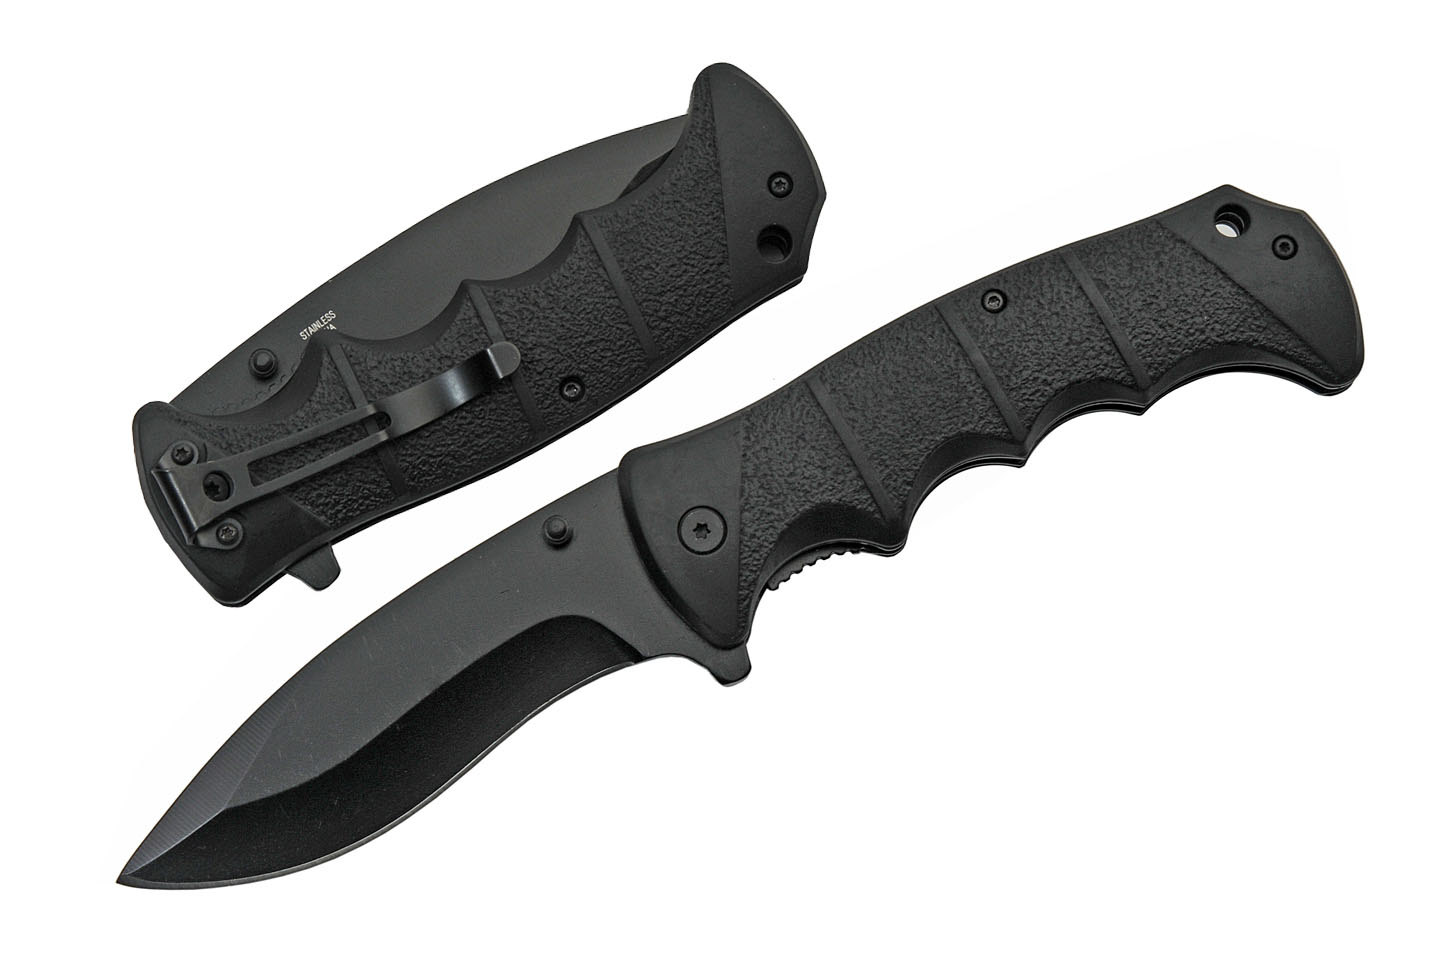 Spring-Assist Folding Knife Oversized 9in. Overall Black Blade EDC Tactical